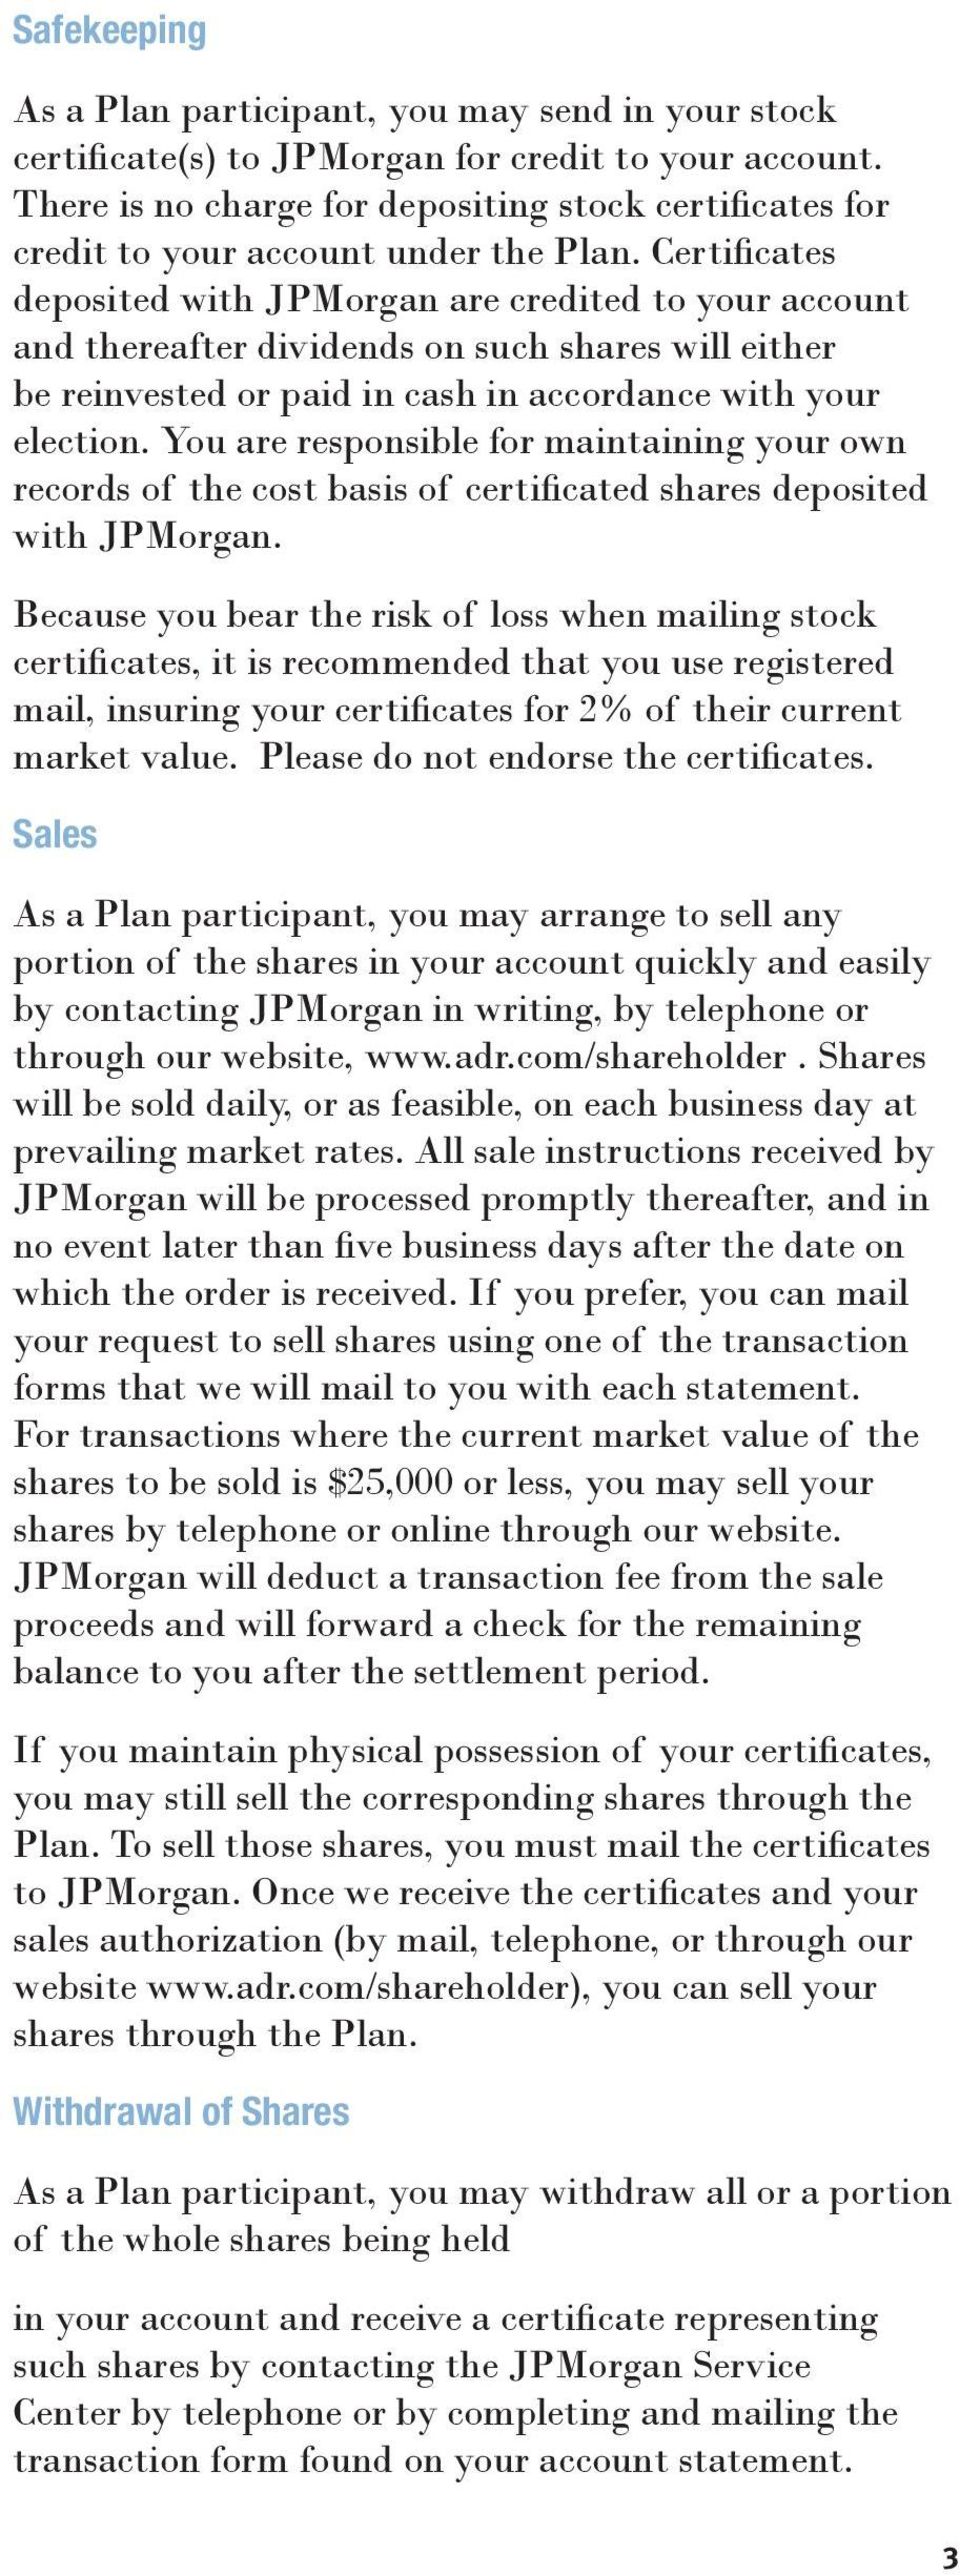 Certificates deposited with JPMorgan are credited to your account and thereafter dividends on such shares will either be reinvested or paid in cash in accordance with your election.